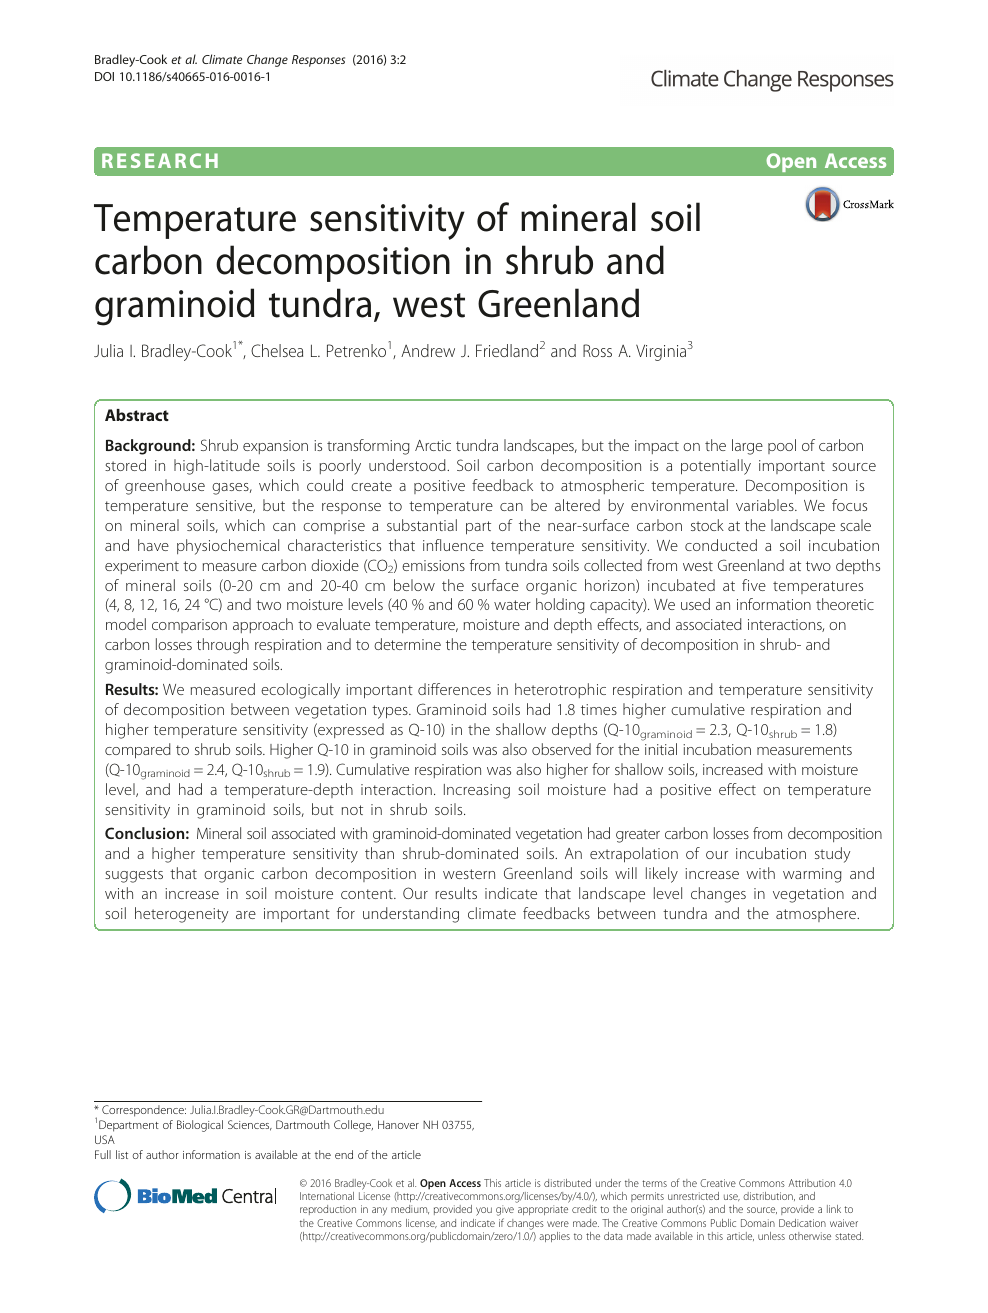 Temperature Sensitivity Of Mineral Soil Carbon Decomposition In Shrub And Graminoid Tundra West Greenland Topic Of Research Paper In Earth And Related Environmental Sciences Download Scholarly Article Pdf And Read For